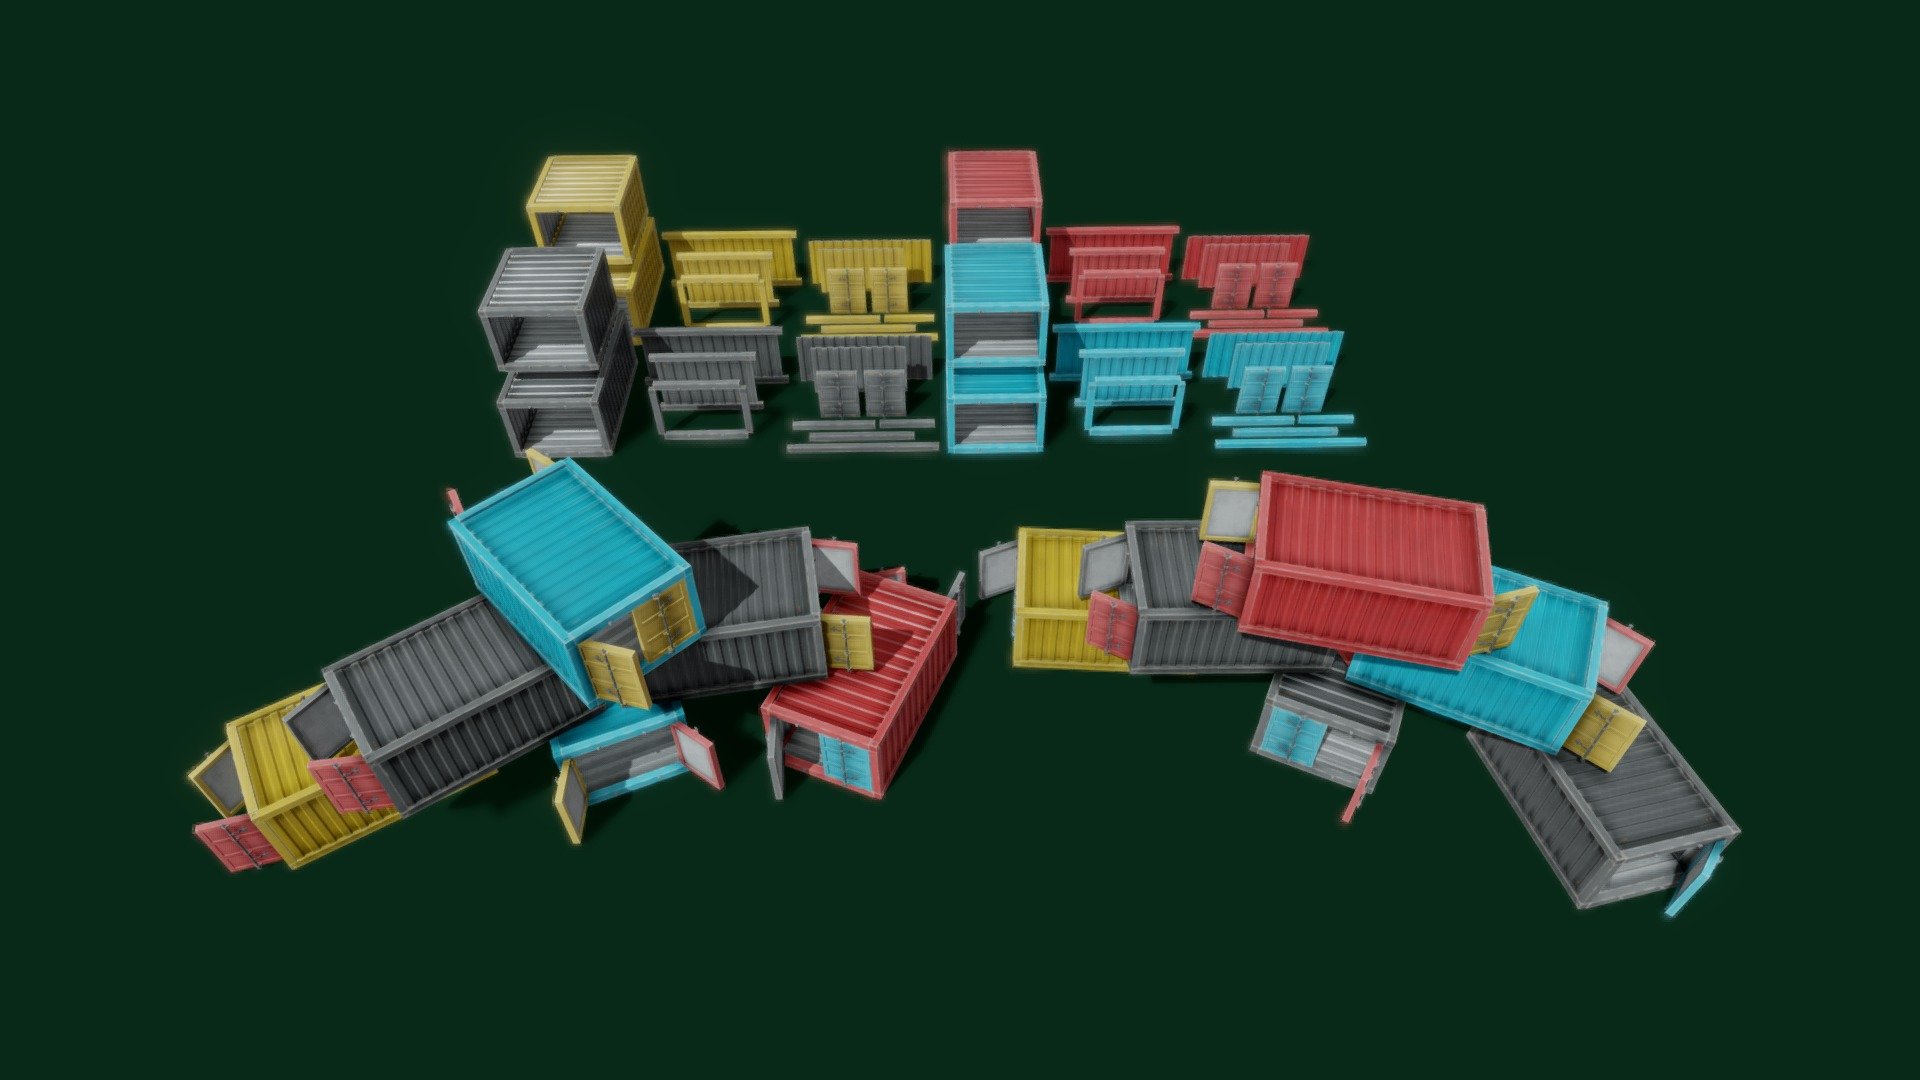 hello, i made Stylized Modullar Container Asset pack. Might good for your scene or game.

also i have free stuff for download please cek my page account, and follow for future upload.

Pack:




13  Models

7 x 4096 texture (4 base colour)

in collaboration with Monqo Studio please check our store:




Unreal Marketplace &ndash; https://bit.ly/2K1U4ai

Unity Marketplace &ndash; https://bit.ly/2BGz2dT

looking for freelance 3D artist for your mobile game? Feel free to ask me by email feral.fe2@gmail.com

oh… if you want, i post several progress in my instagram @ferozes

And check out my game on googleplay FULL FREE NO ADS —&gt; https://bit.ly/2FRlptH If you can reach level 17++ Mention me on twitter @Frandez0 XD

thank you for supporting me, have nice scene :D - Stylized Modullar Container Asset Pack - Buy Royalty Free 3D model by ferofluid 3d model